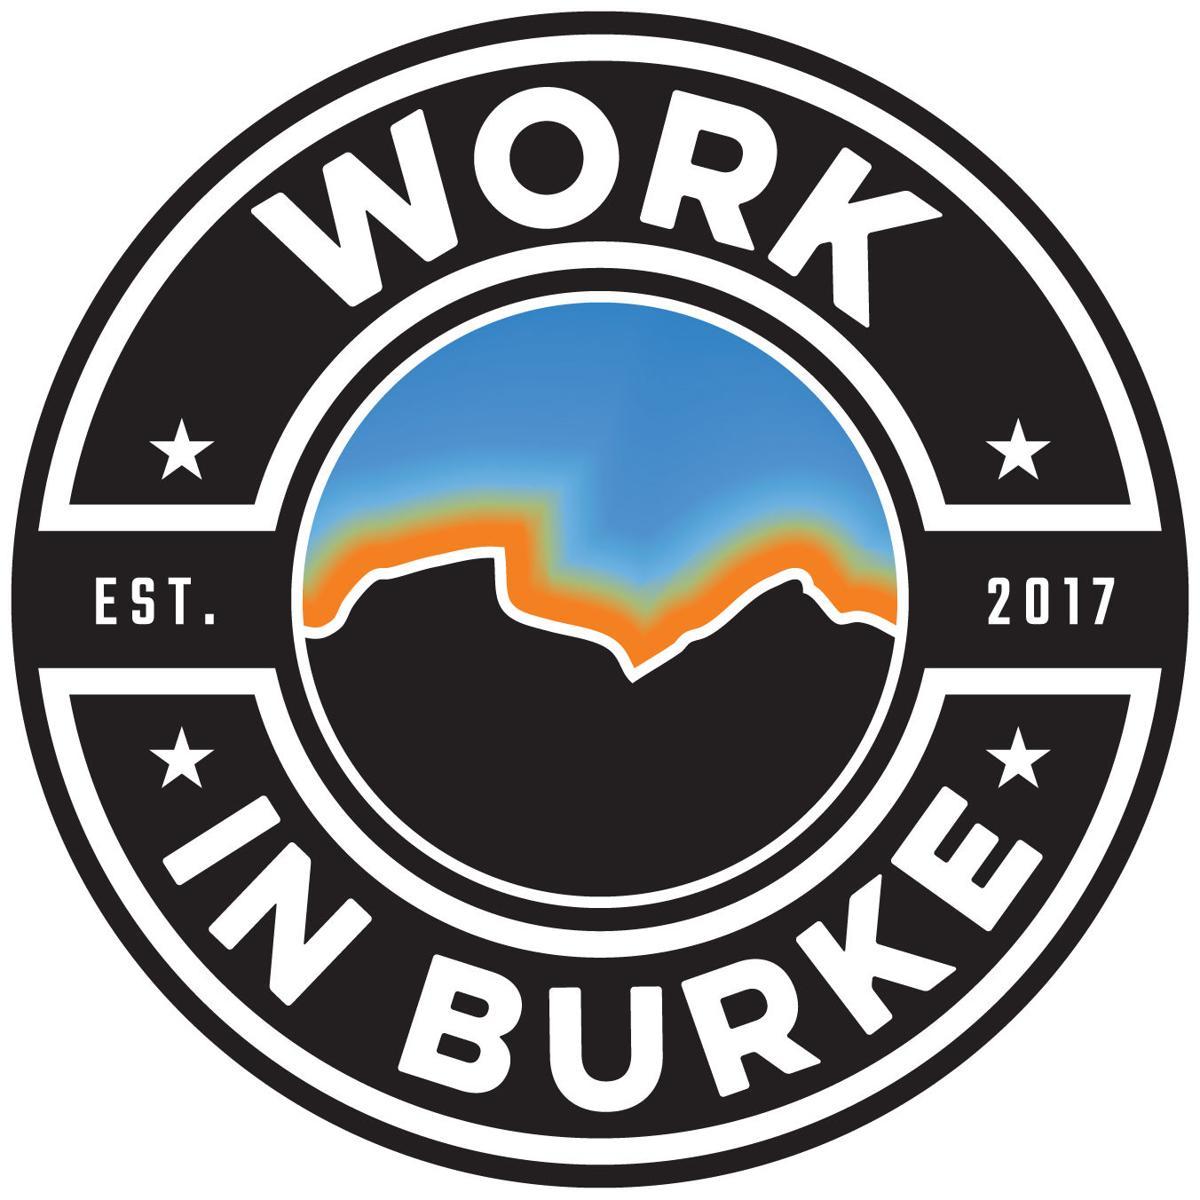 Burke Logo - Work in Burke' initiative aims to match students with local careers ...